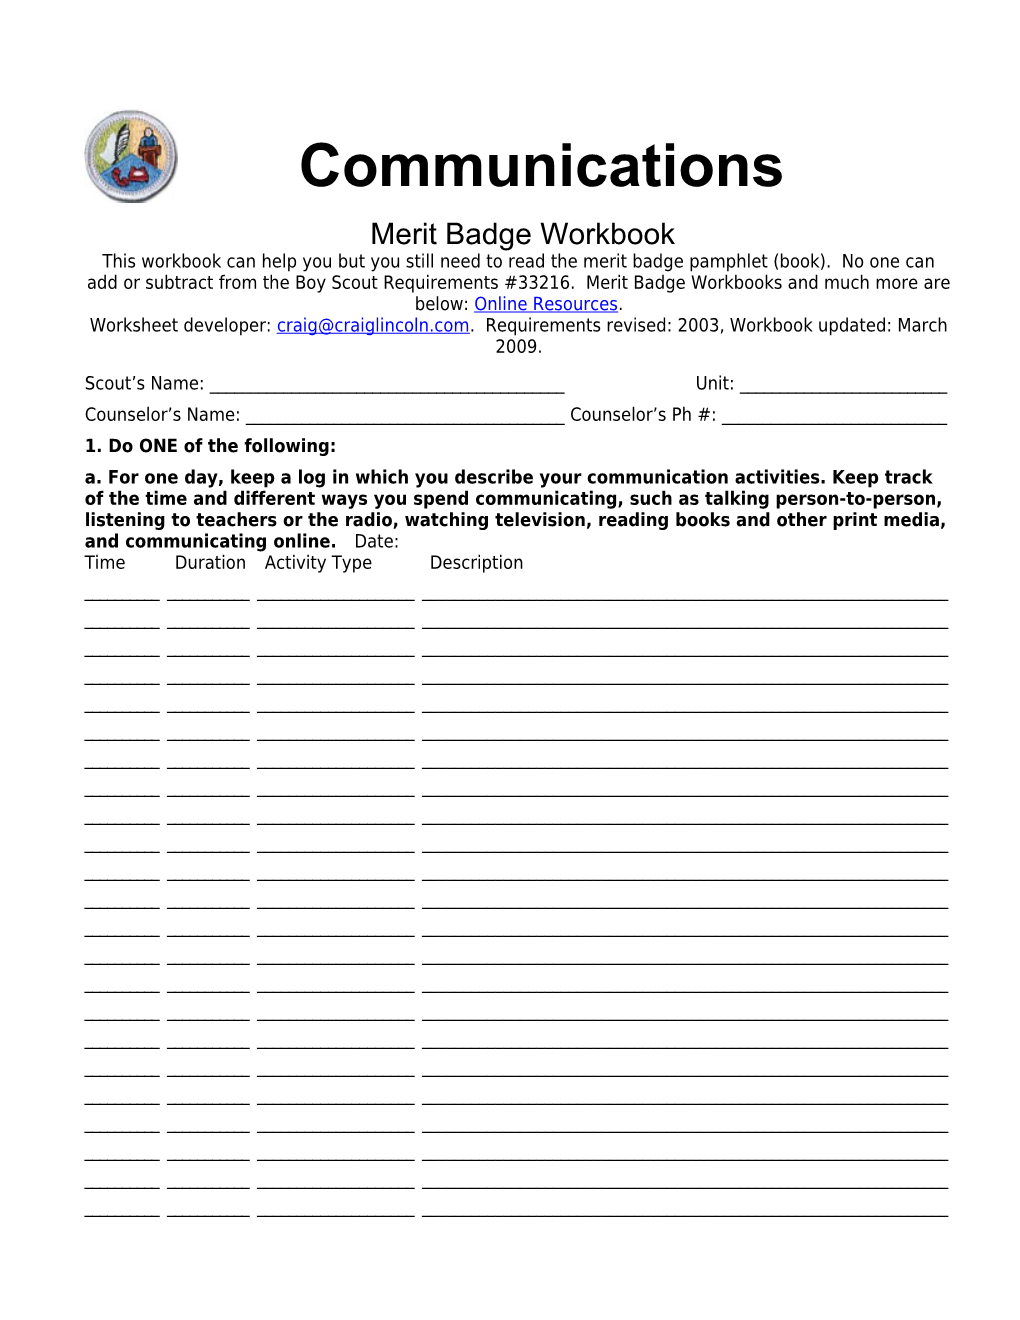 Communications P. 9 Merit Badge Workbook Scout S Name: ______